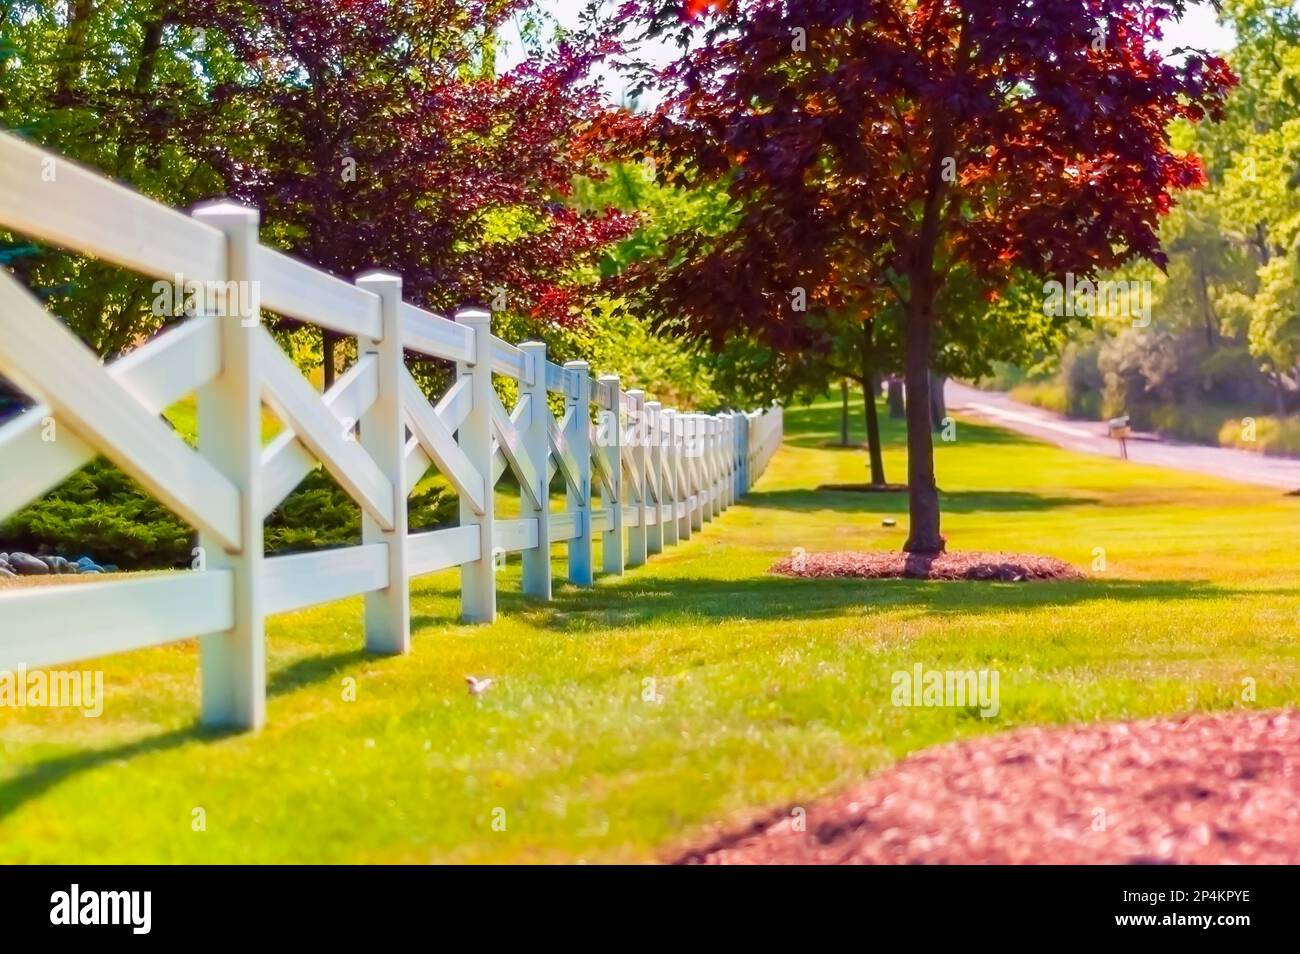 A crossbuck / cross buck style fence around the perimeter of a property in the US. Stock Photo